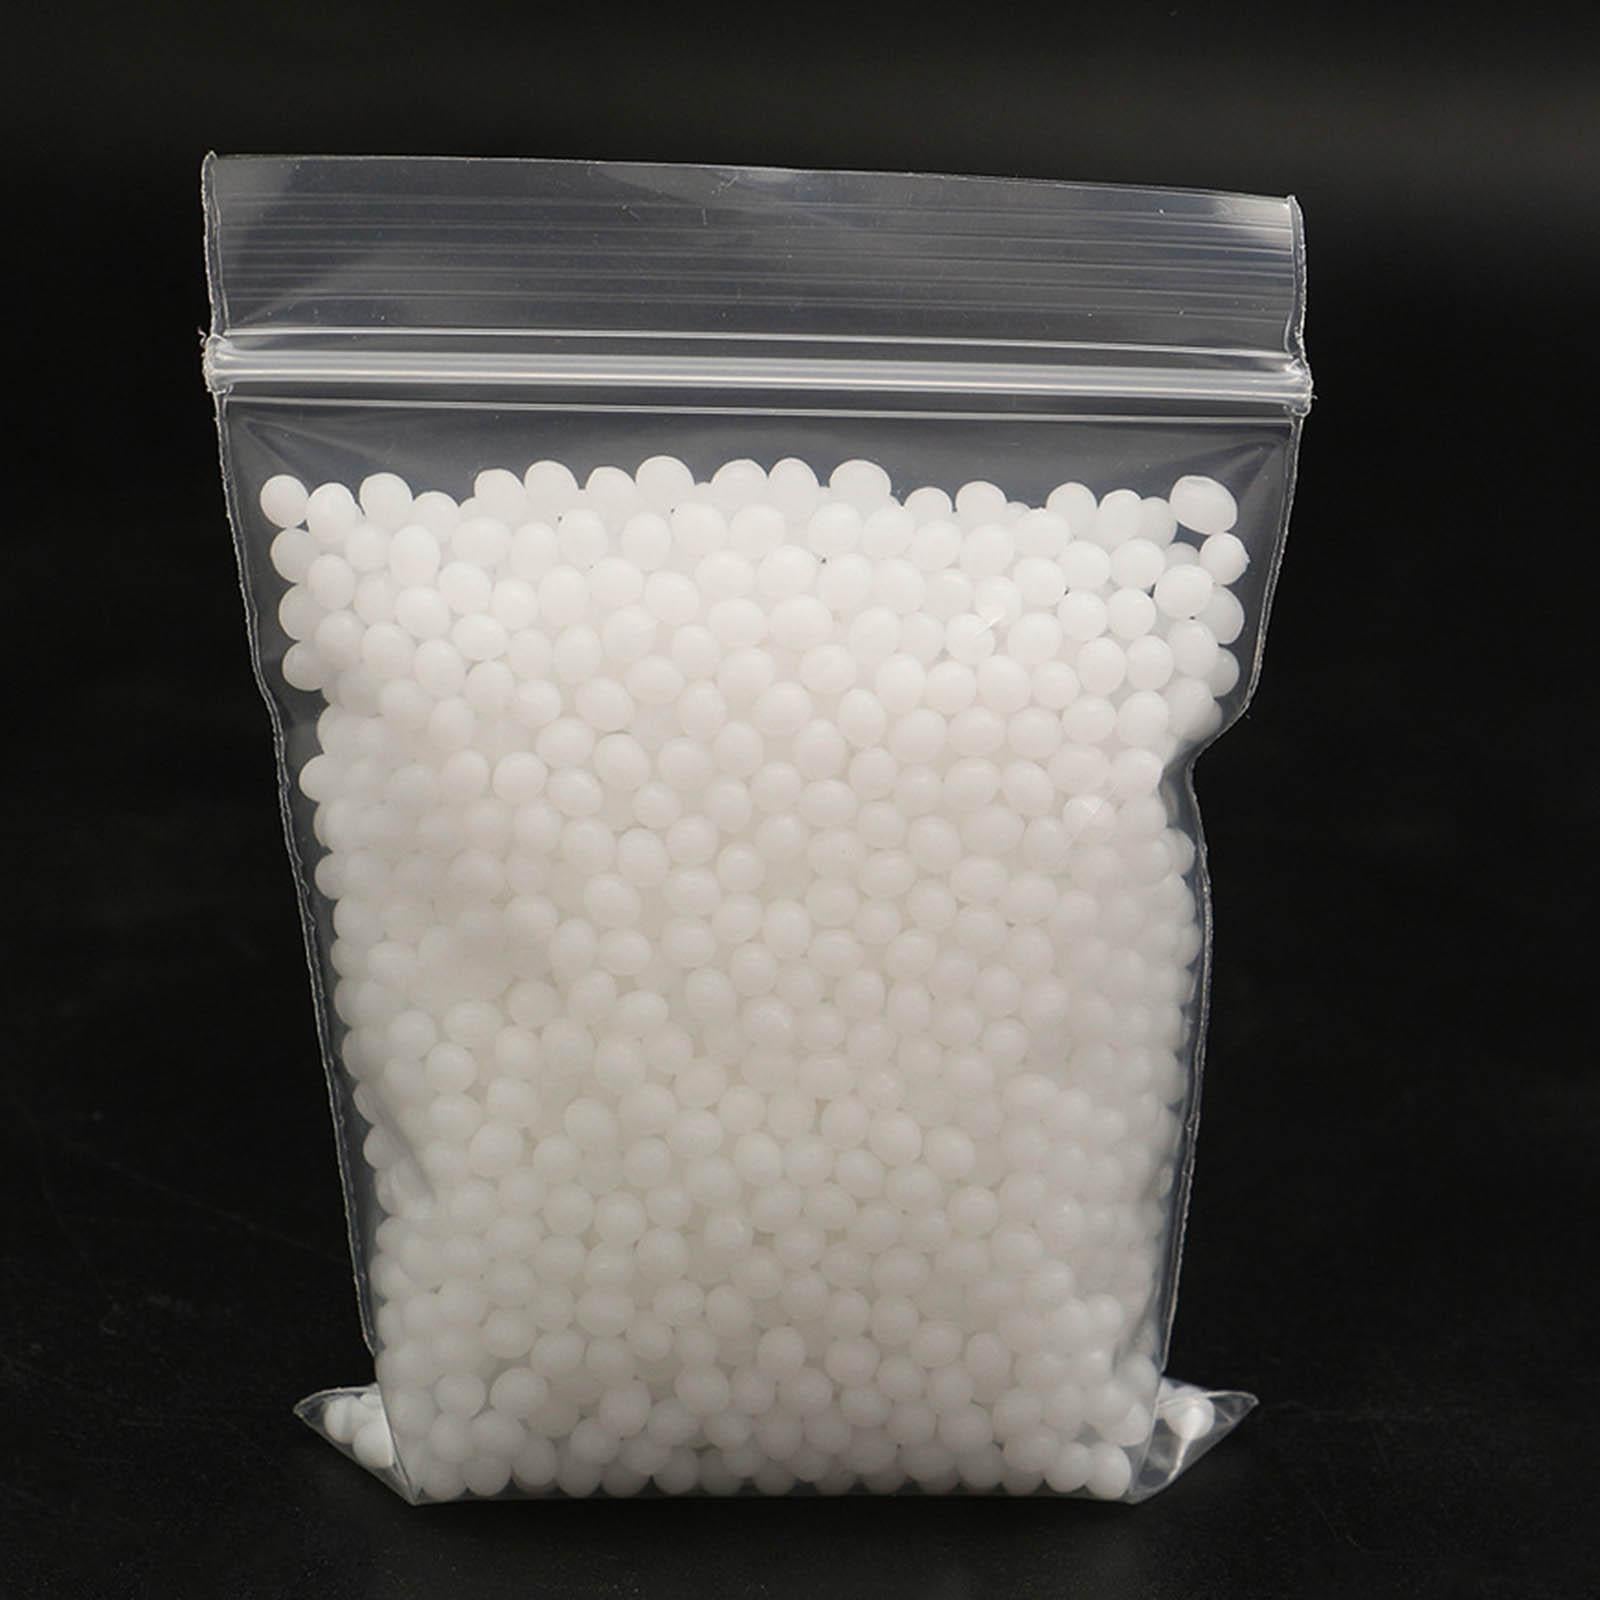 10G Temporary Tooth Solid Glue Thermal Beads Teeth Gaps Glue White Denture